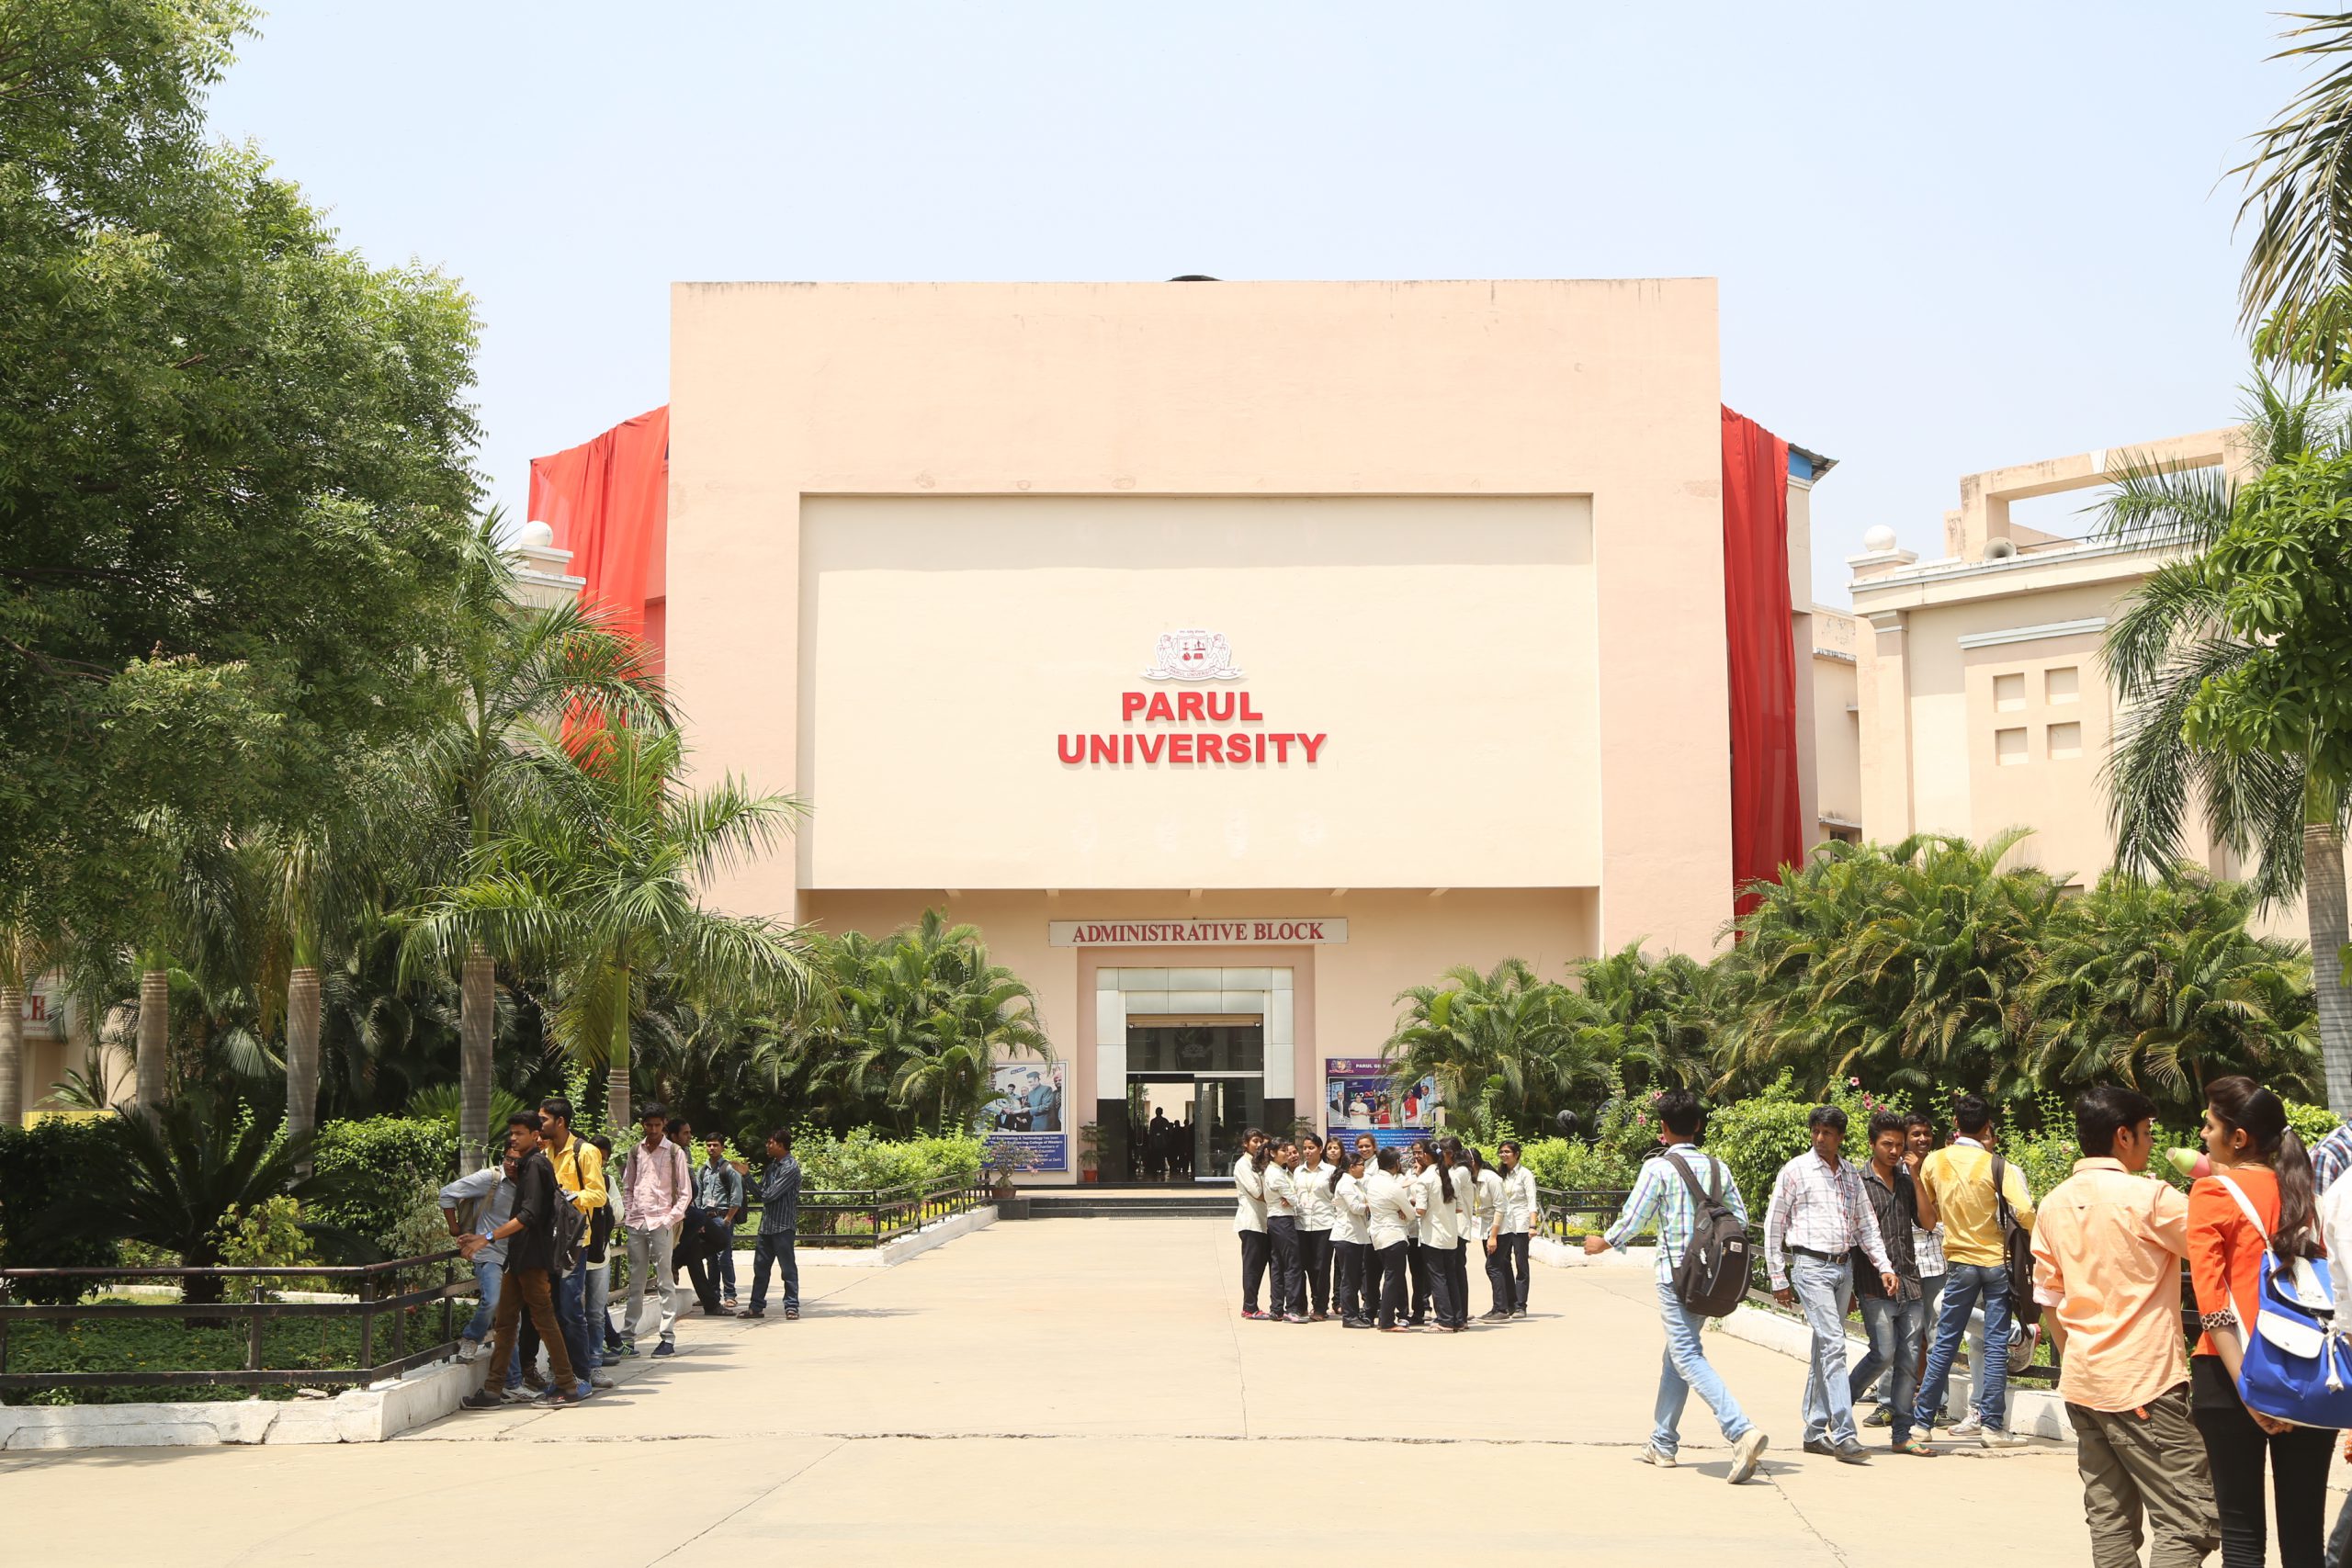 Parul university kit of Homoeopathy and Ayurved Medicine to Boost Immunity against COVID’19